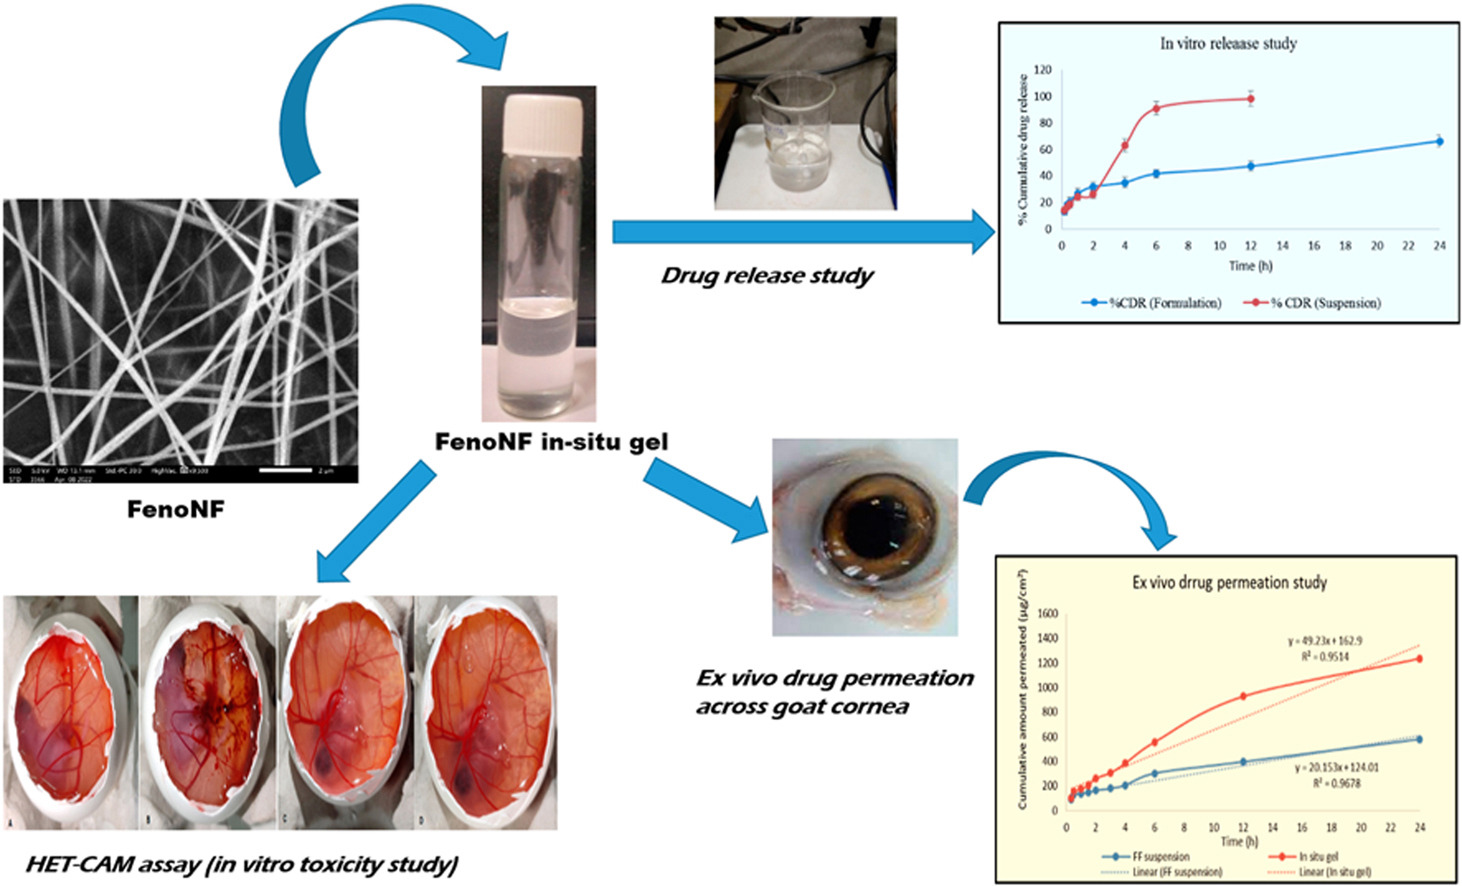 Fenofibrate loaded nanofibers based thermo-responsive gel for ocular delivery: Formulation development, characterization and in vitro toxicity study